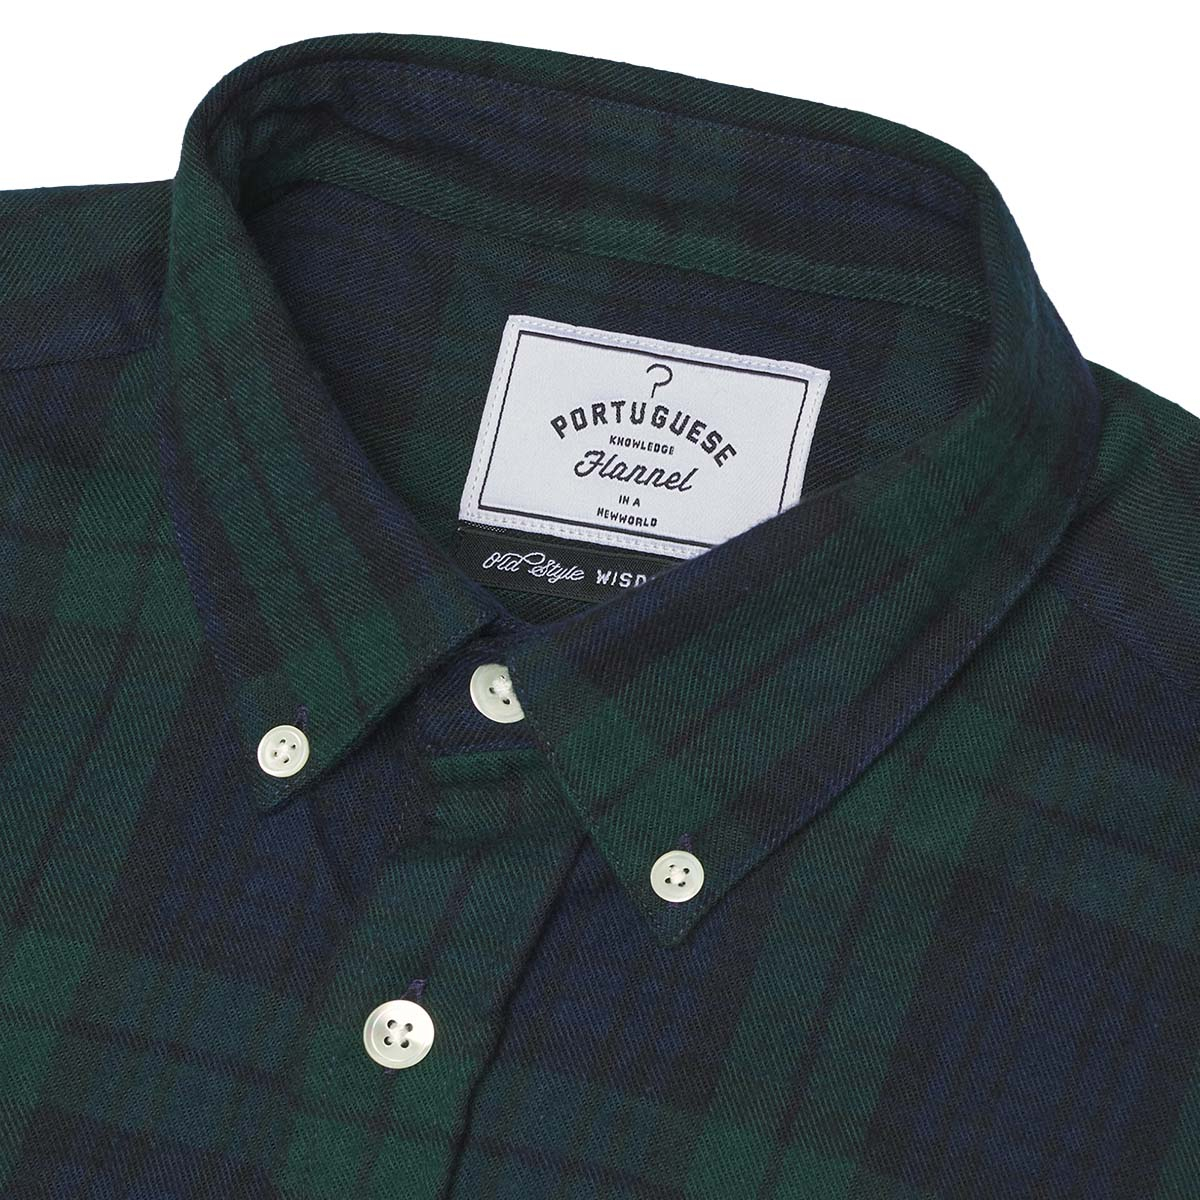 Portuguese Flannel Bonfim Shirt, made with the finest exclusive fabrics